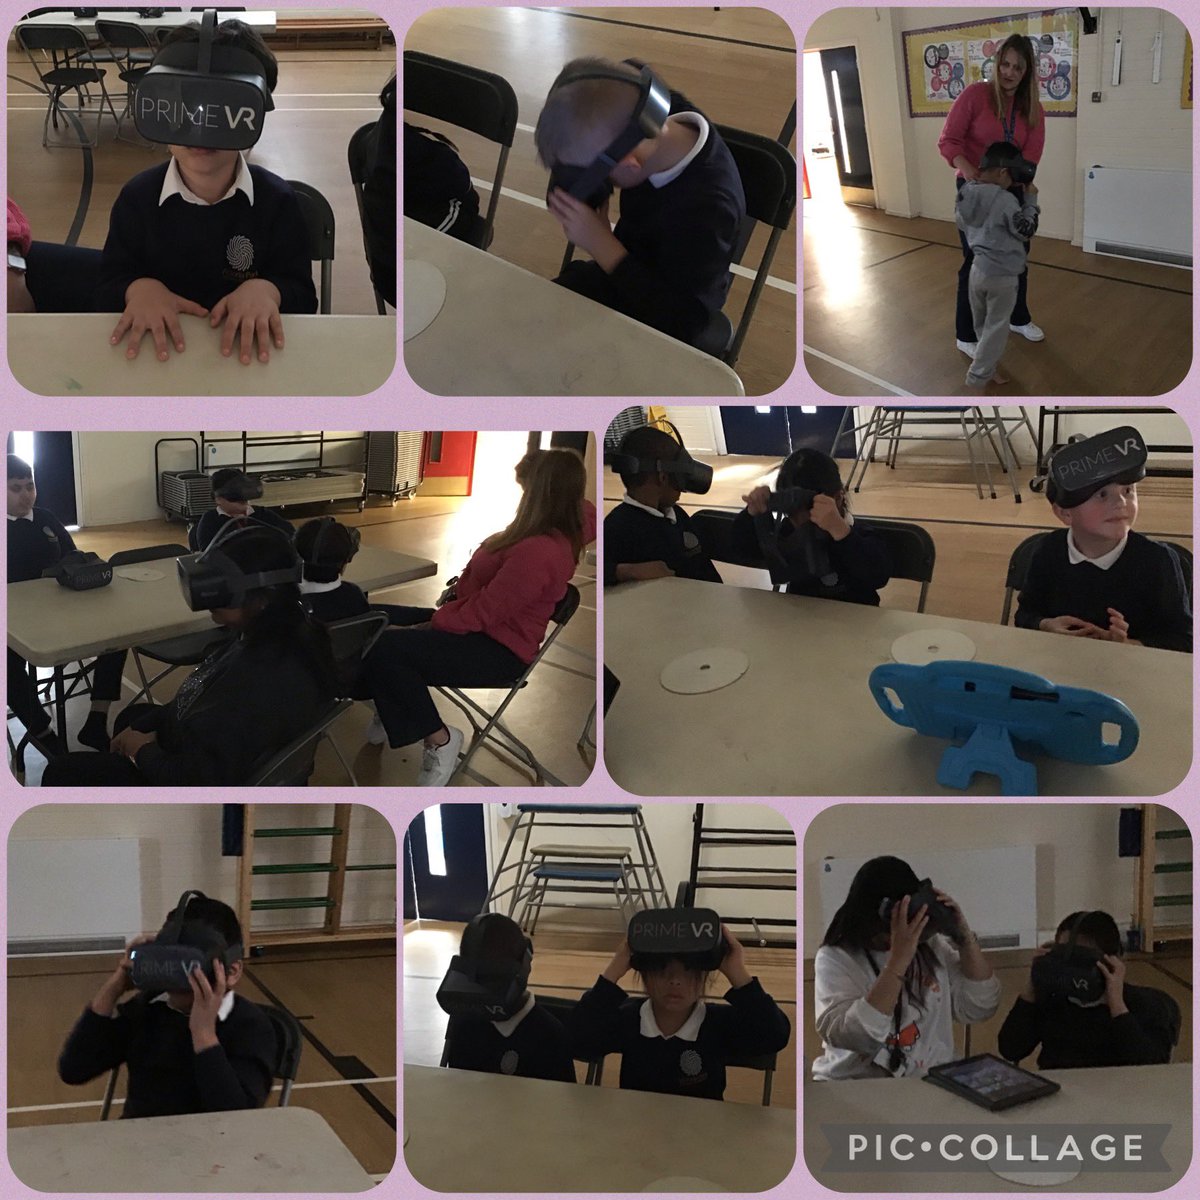 Thank you Miss Blackstock for organising an exciting experience for the Busy 🧸s today. We loved using the virtual reality headsets to see volcanic eruptions 🌋 @VicParkAcademy @KainthKiran @BiArfana @agnes79_79 @parvkumari @Tanyabee1303